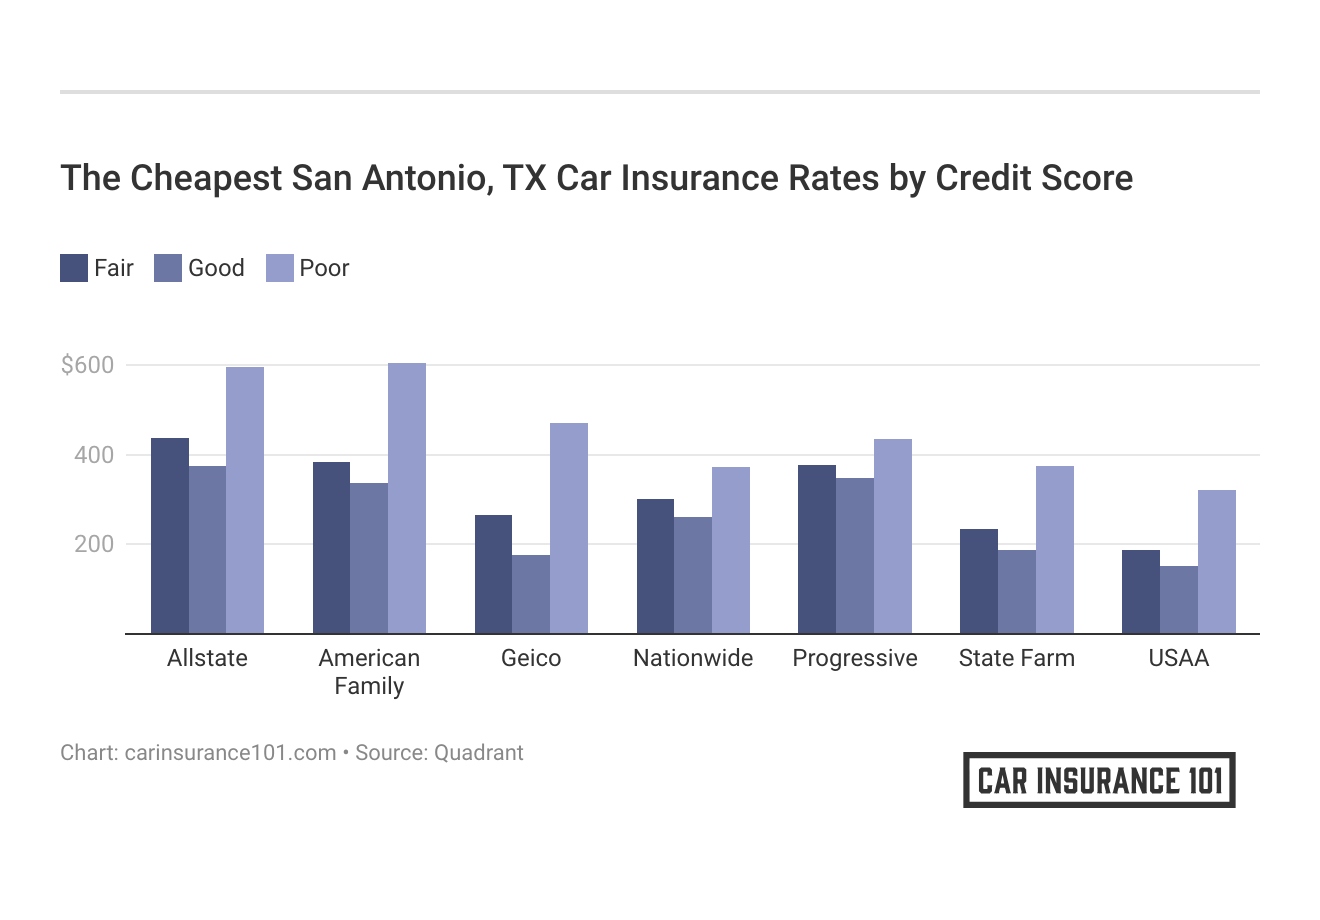 <h3>The Cheapest San Antonio, TX Car Insurance Rates by Credit Score</h3>